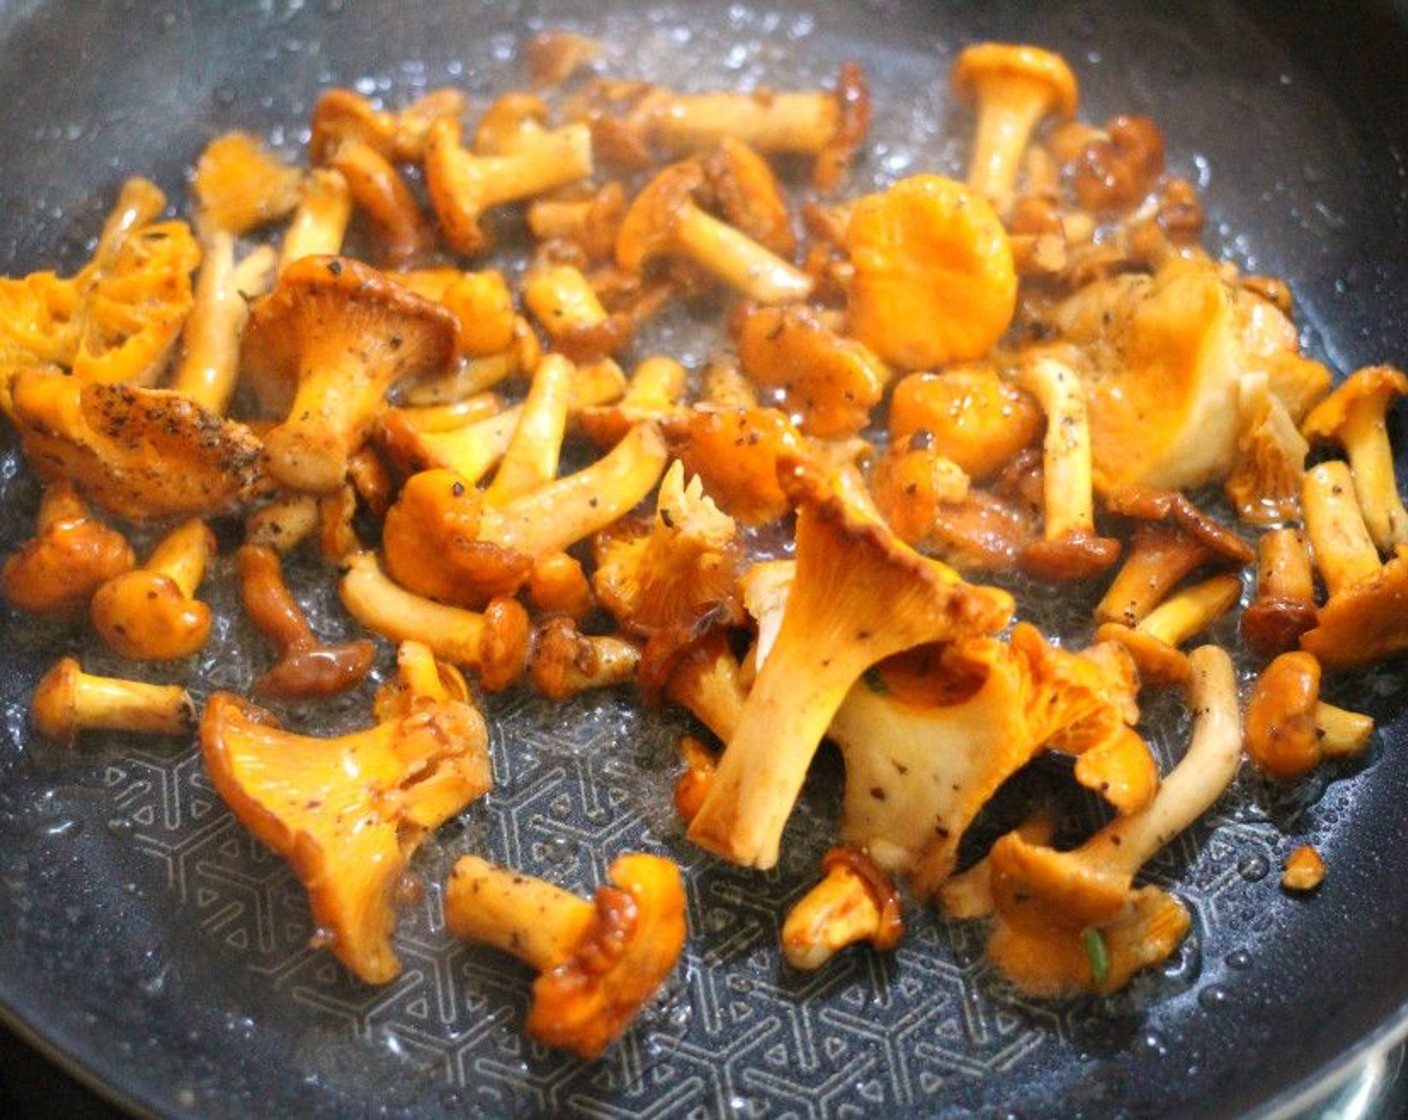 step 1 Saute Chanterelle Mushrooms (4 cups) in Extra-Virgin Olive Oil (1 Tbsp) until golden brown. Season with Salt (to taste) and Ground Black Pepper (to taste), and set aside.